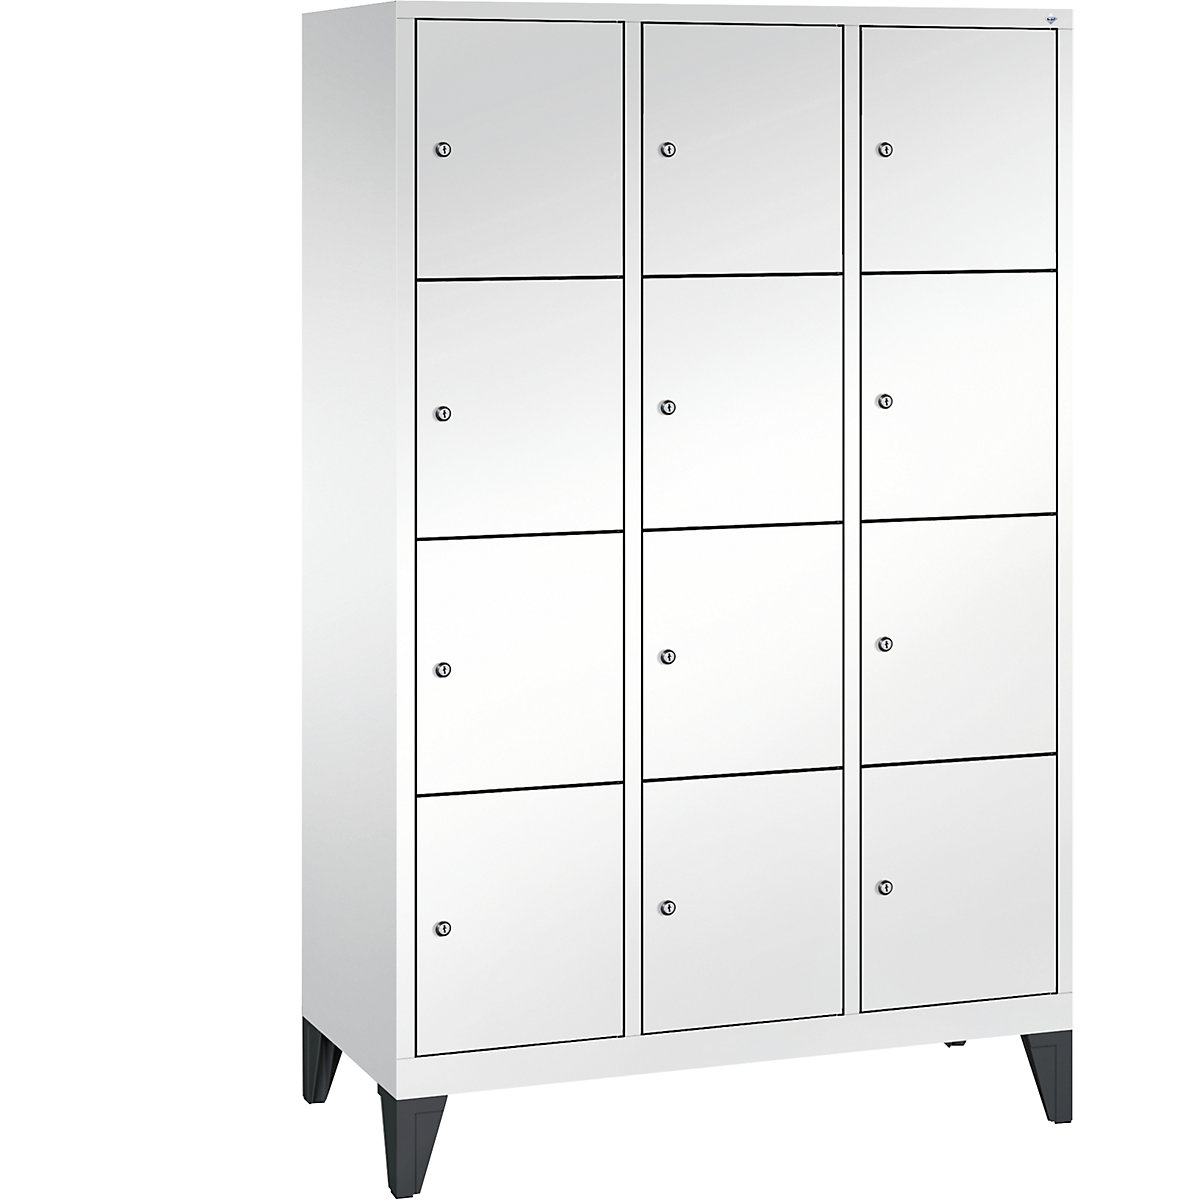 CLASSIC locker unit with feet – C+P, 3 compartments, 4 shelf compartments each, compartment width 400 mm, traffic white-9